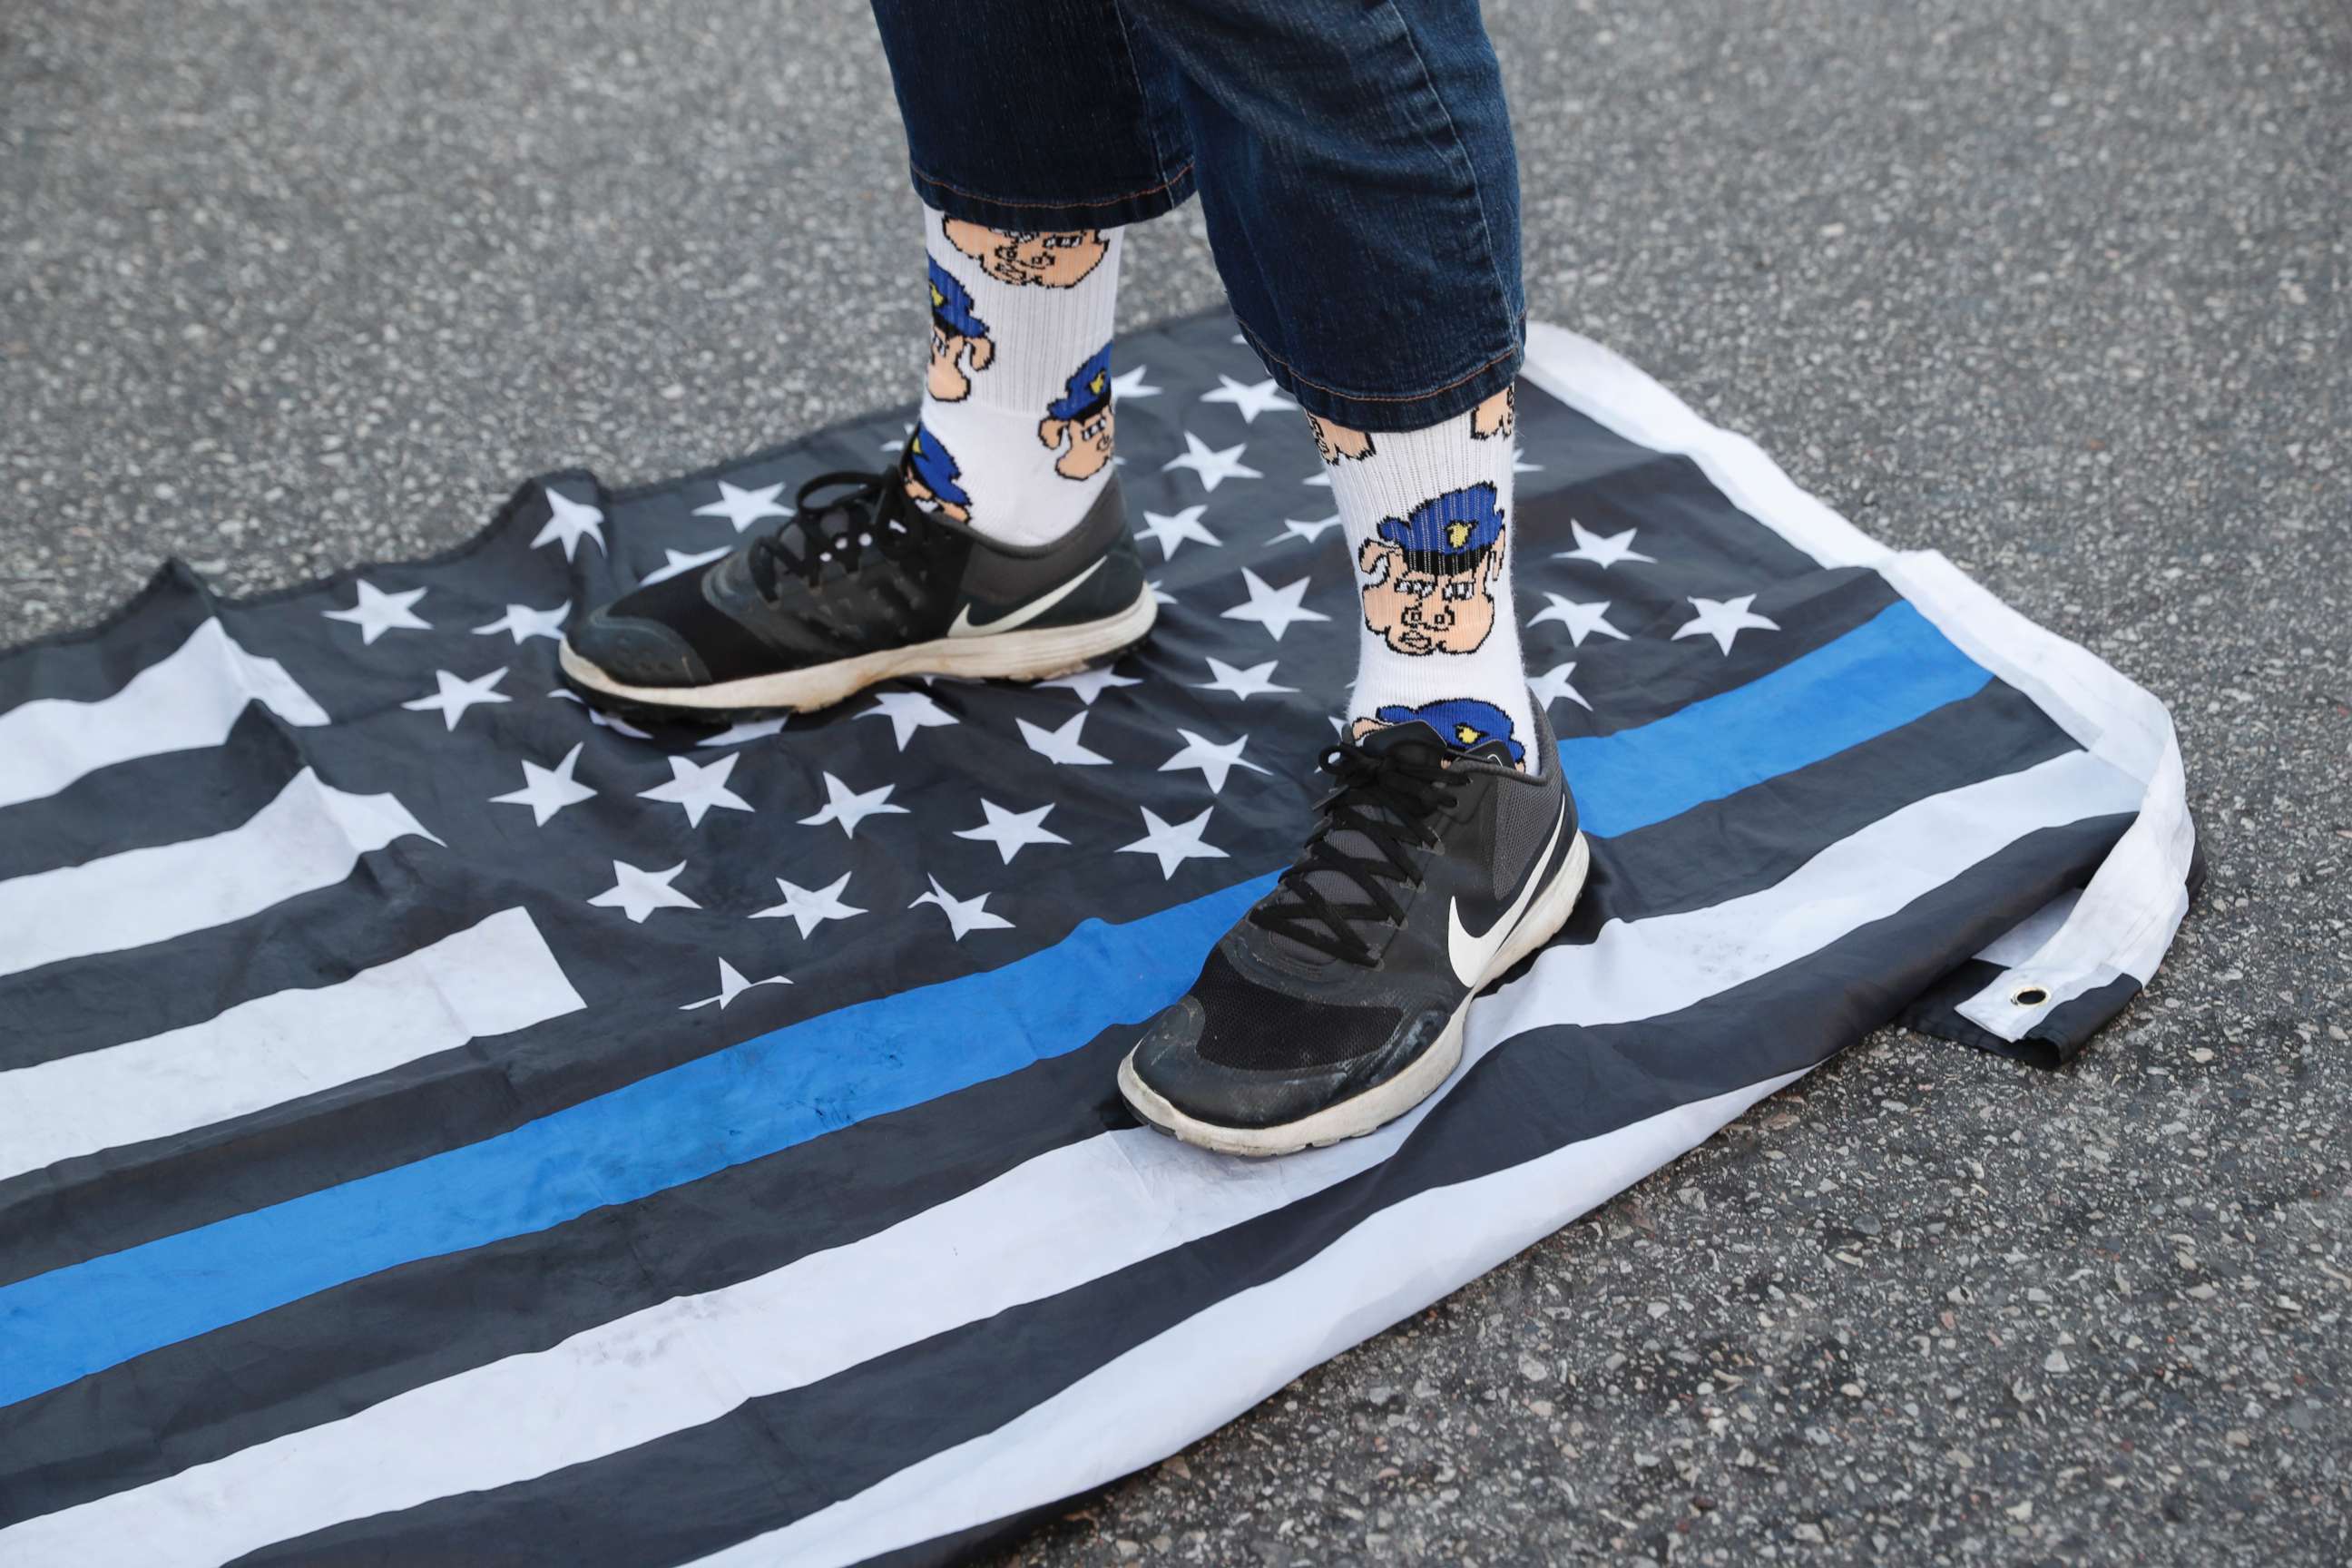 PHOTO: A protester steps on a flag Saturday, Sept. 16, 2017 in University City, Mo., in response to a not guilty verdict in the trial of former St. Louis Police officer Jason Stockley. 